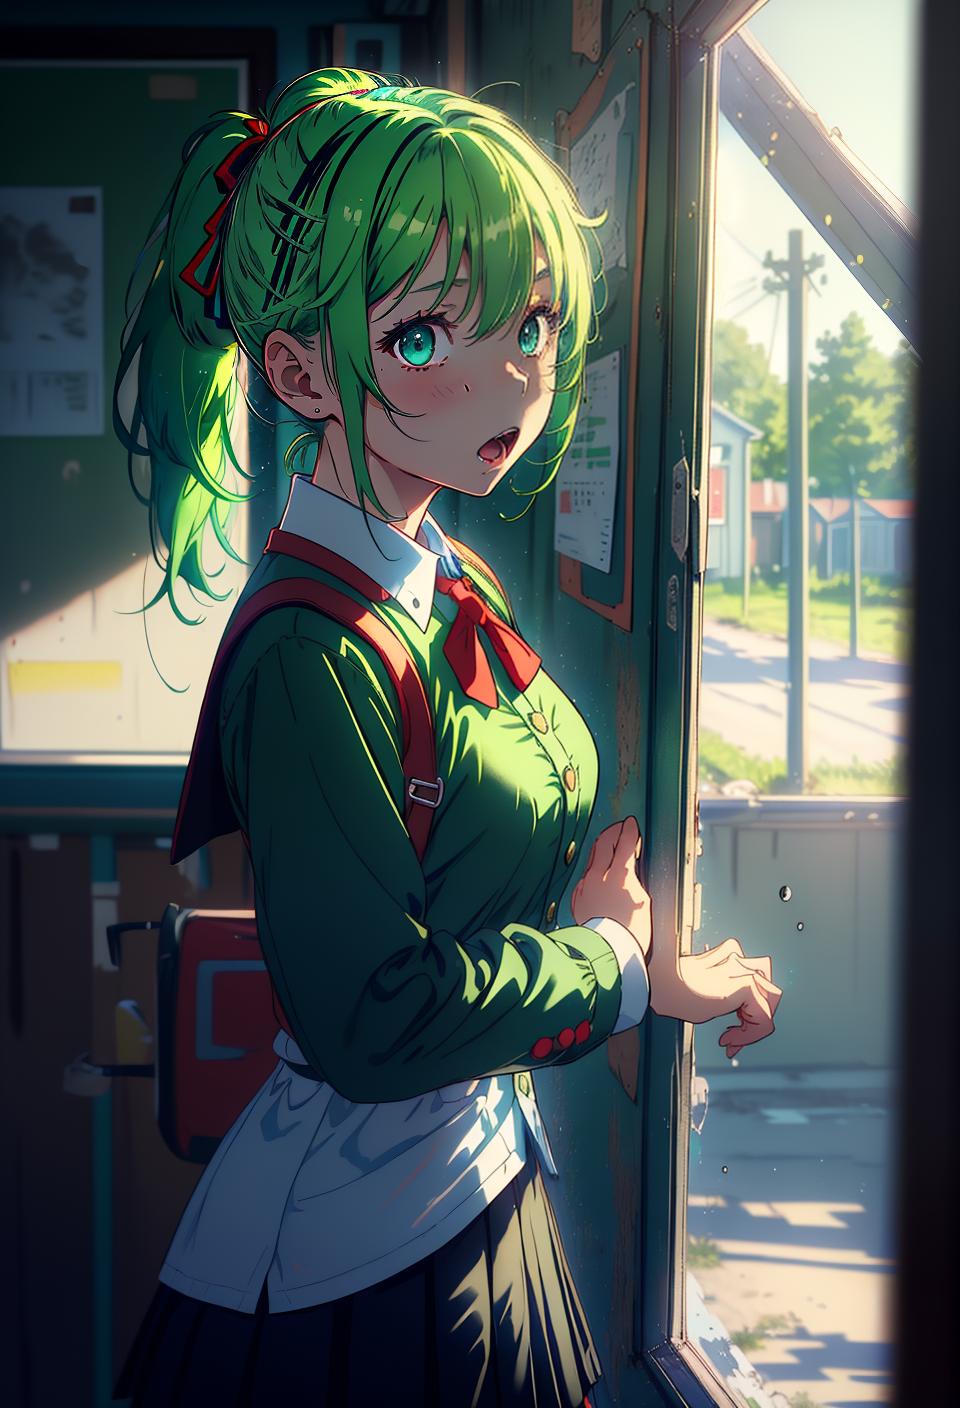  ((trending, highres, masterpiece, cinematic shot)), 1girl, young, female student uniform, country scene, medium-length straight light green hair, short ponytail, large aqua eyes, goofy personality, scared expression, red skin, chaotic, limber